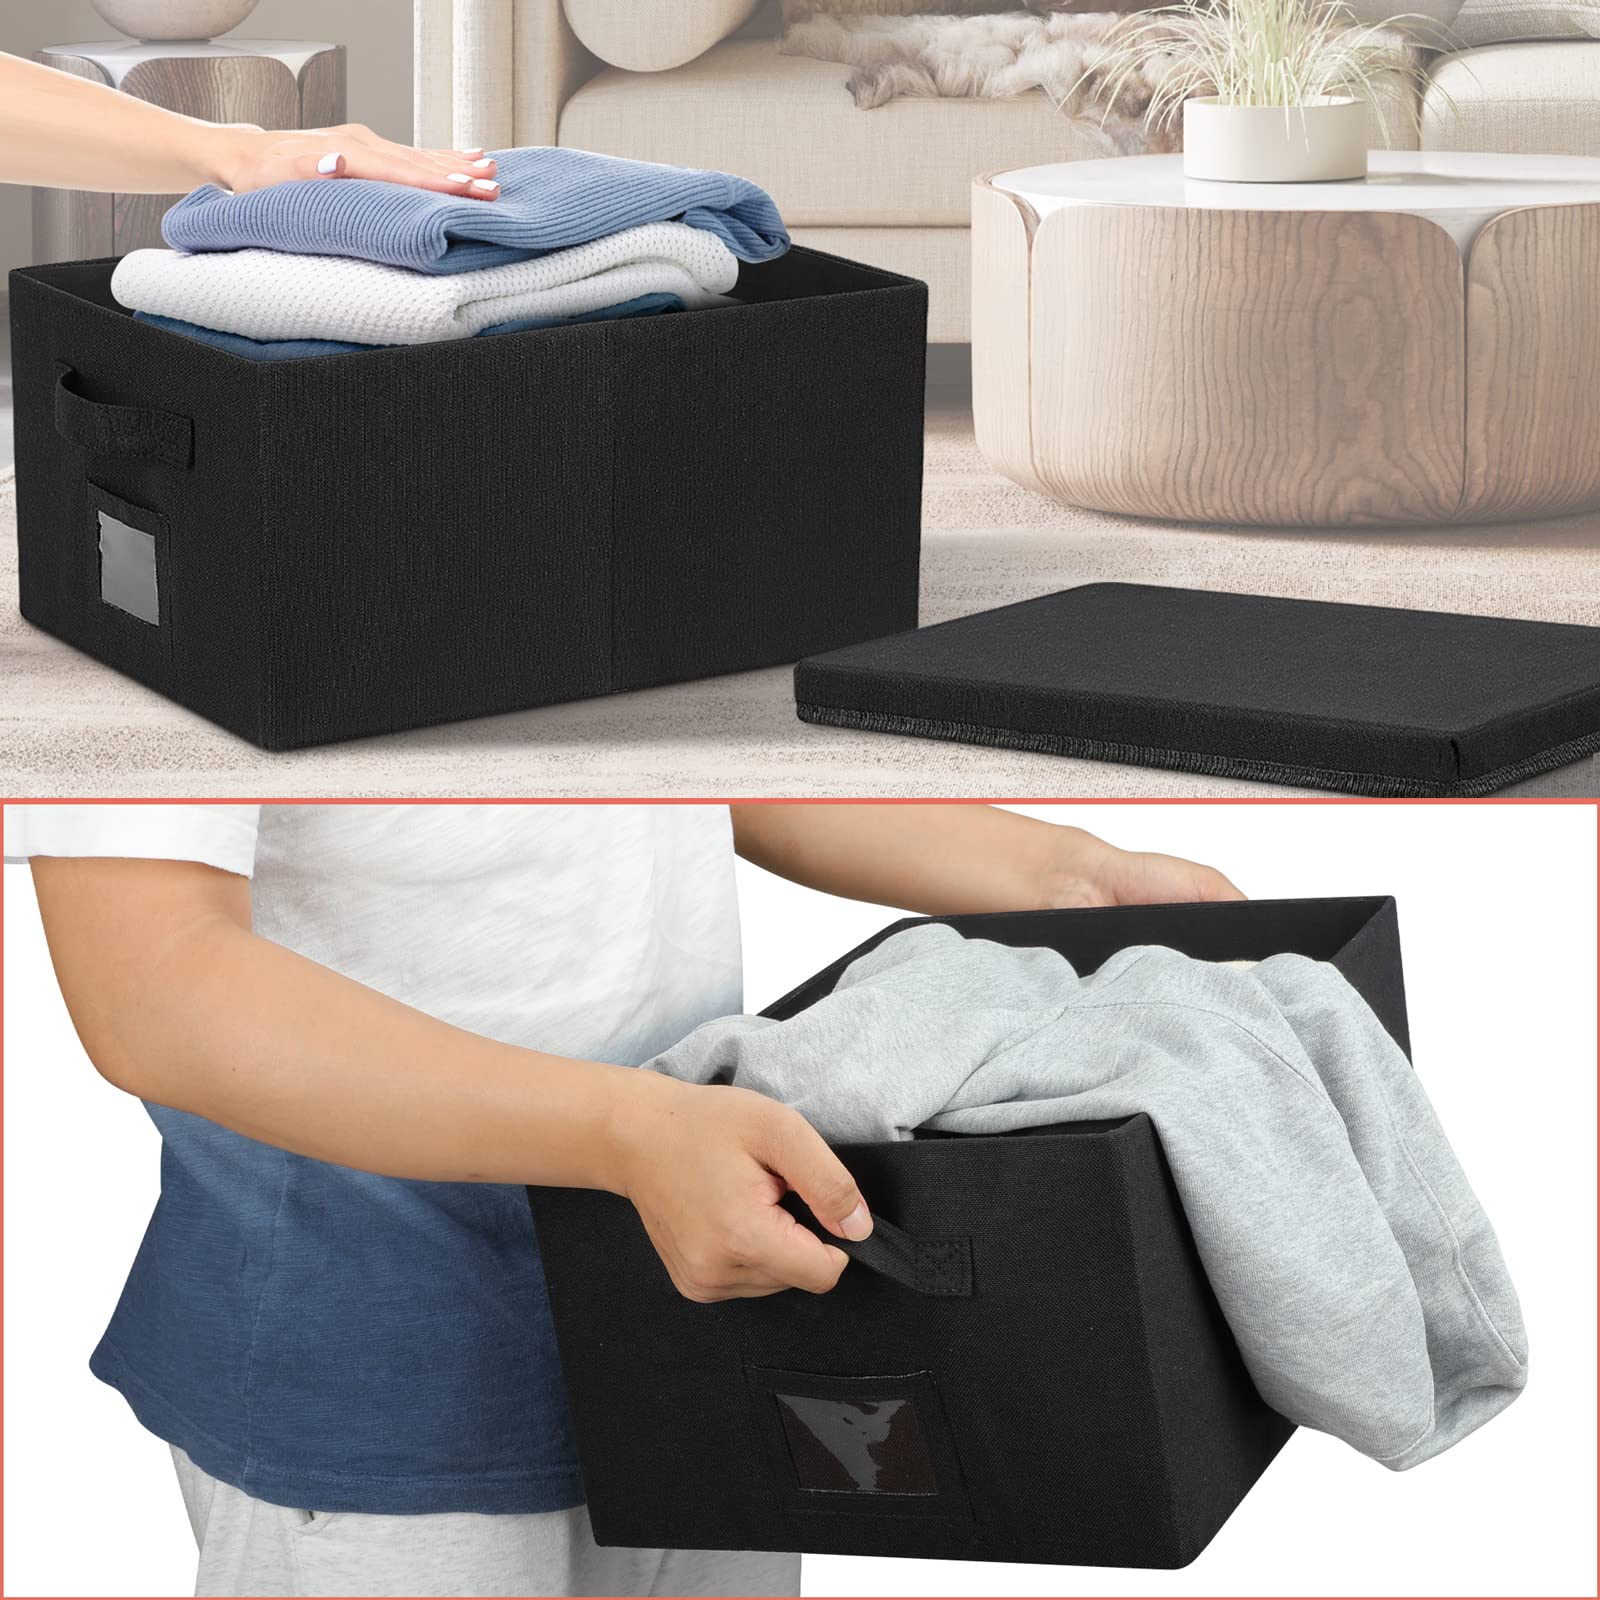 Graciadeco 22.8qt Closet Storage Boxes with Lids Black Folding Keepsake Storage Bins Stackable Flat Lidded Carboard Storage Contaner for Clothes Barbie Shoes, 2 Pack